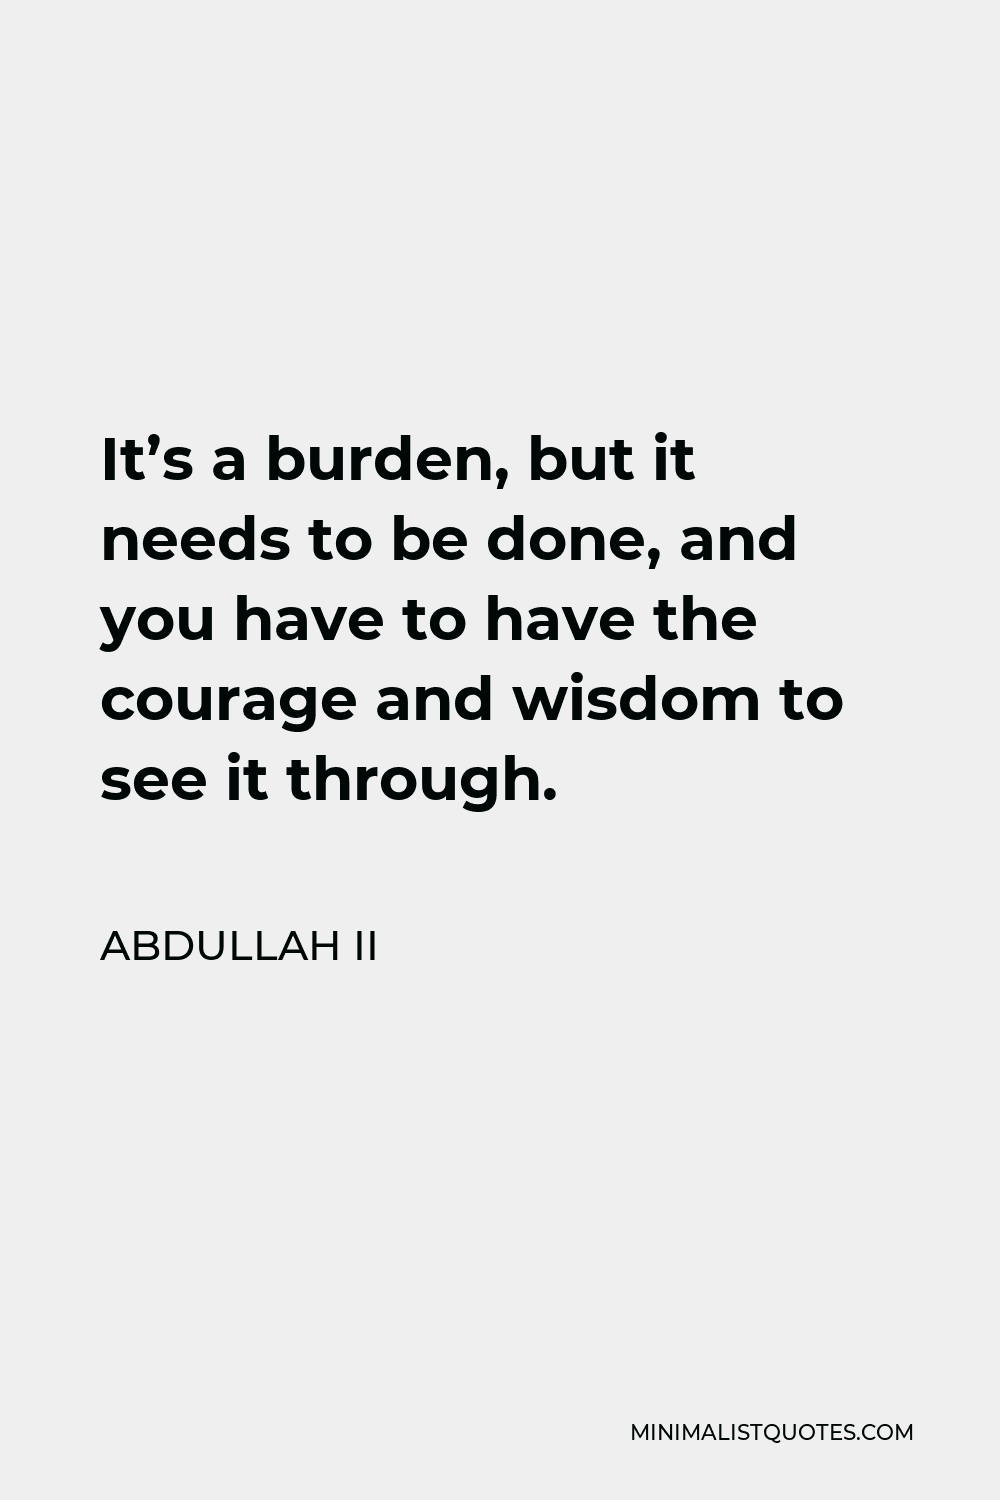 Abdullah II Quote - It’s a burden, but it needs to be done, and you have to have the courage and wisdom to see it through.